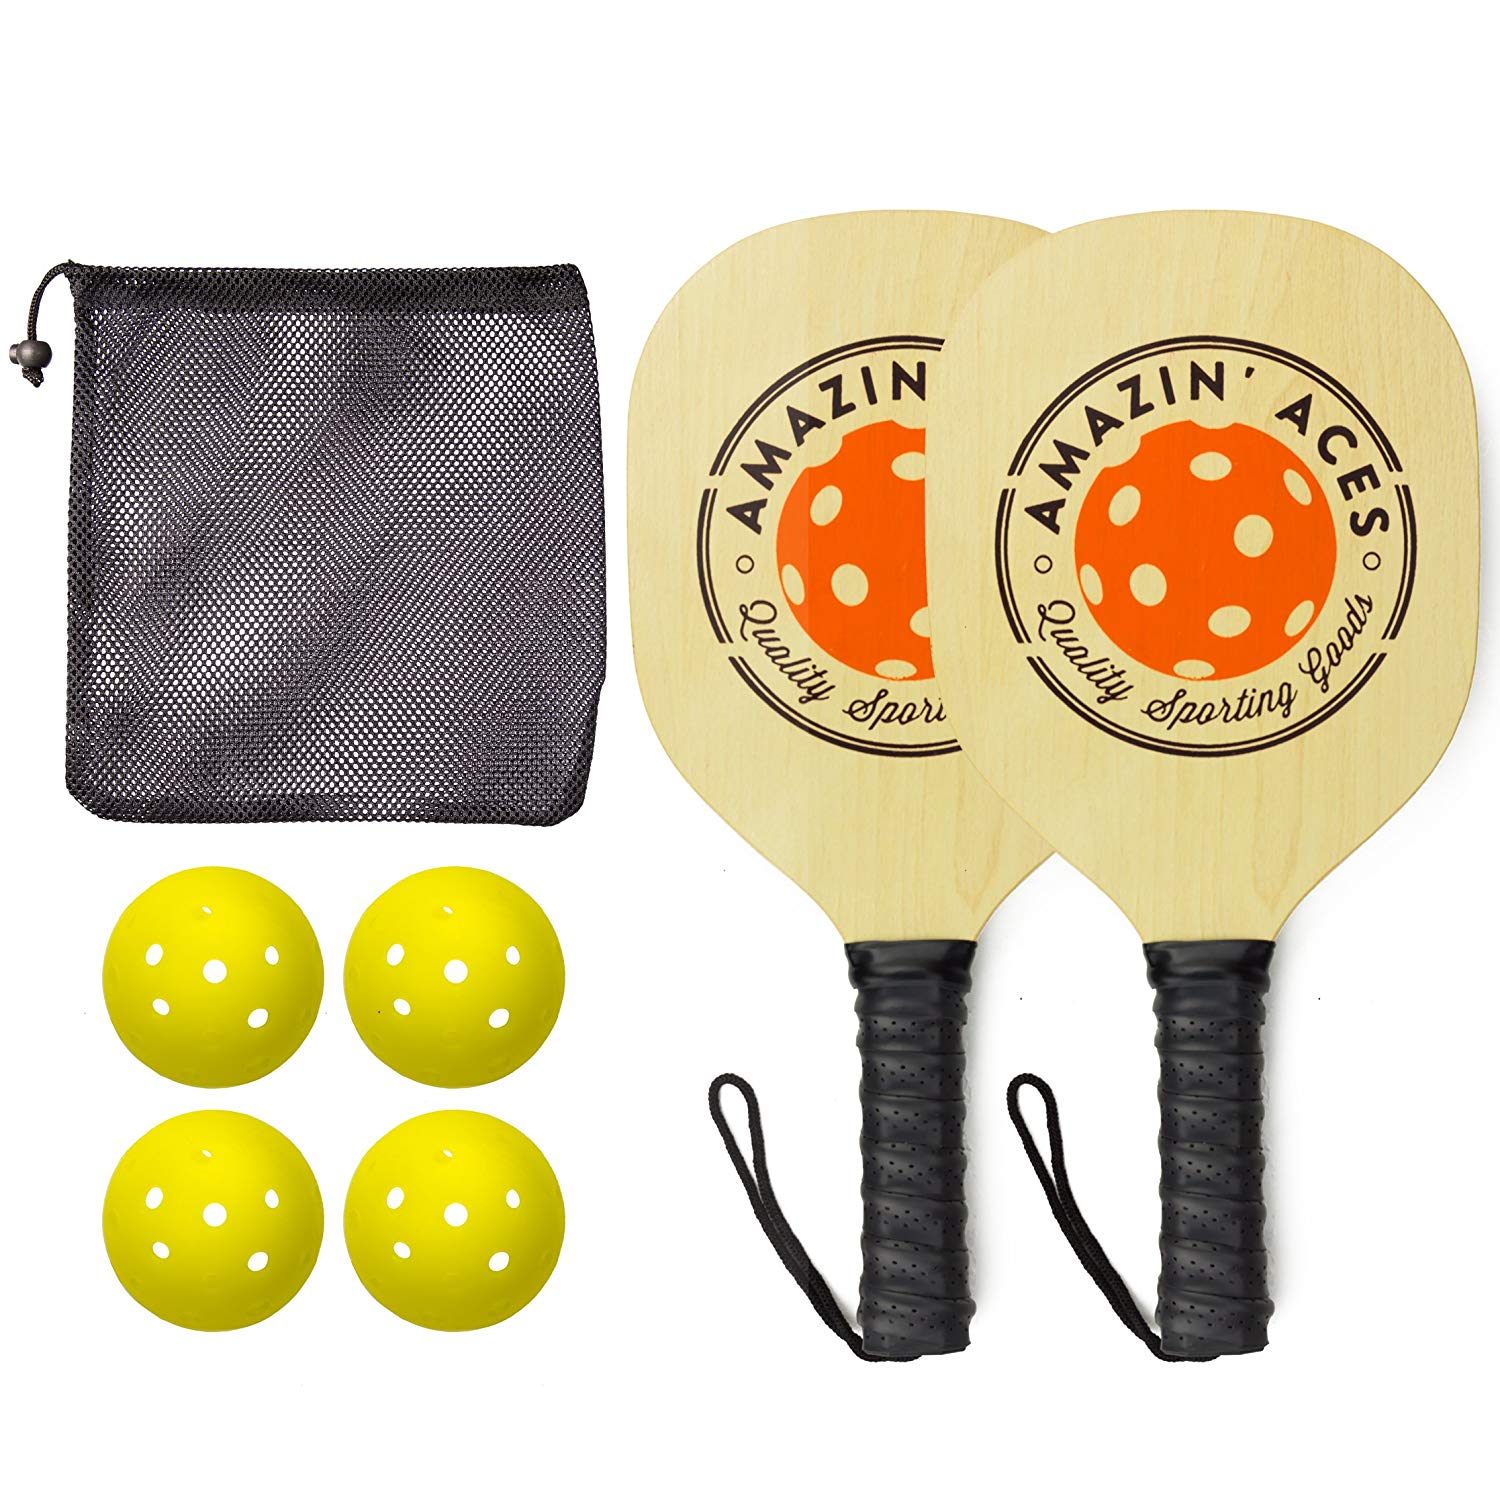 Amazin' Aces Pickleball Paddles | Gift Ready Box | Set Includes 2 Wood Pickleball Paddles + 4 Pickleballs + 1 Mesh Carry Bag | Great Rackets for Beginners | Pickleball Paddle Set Includes eBook